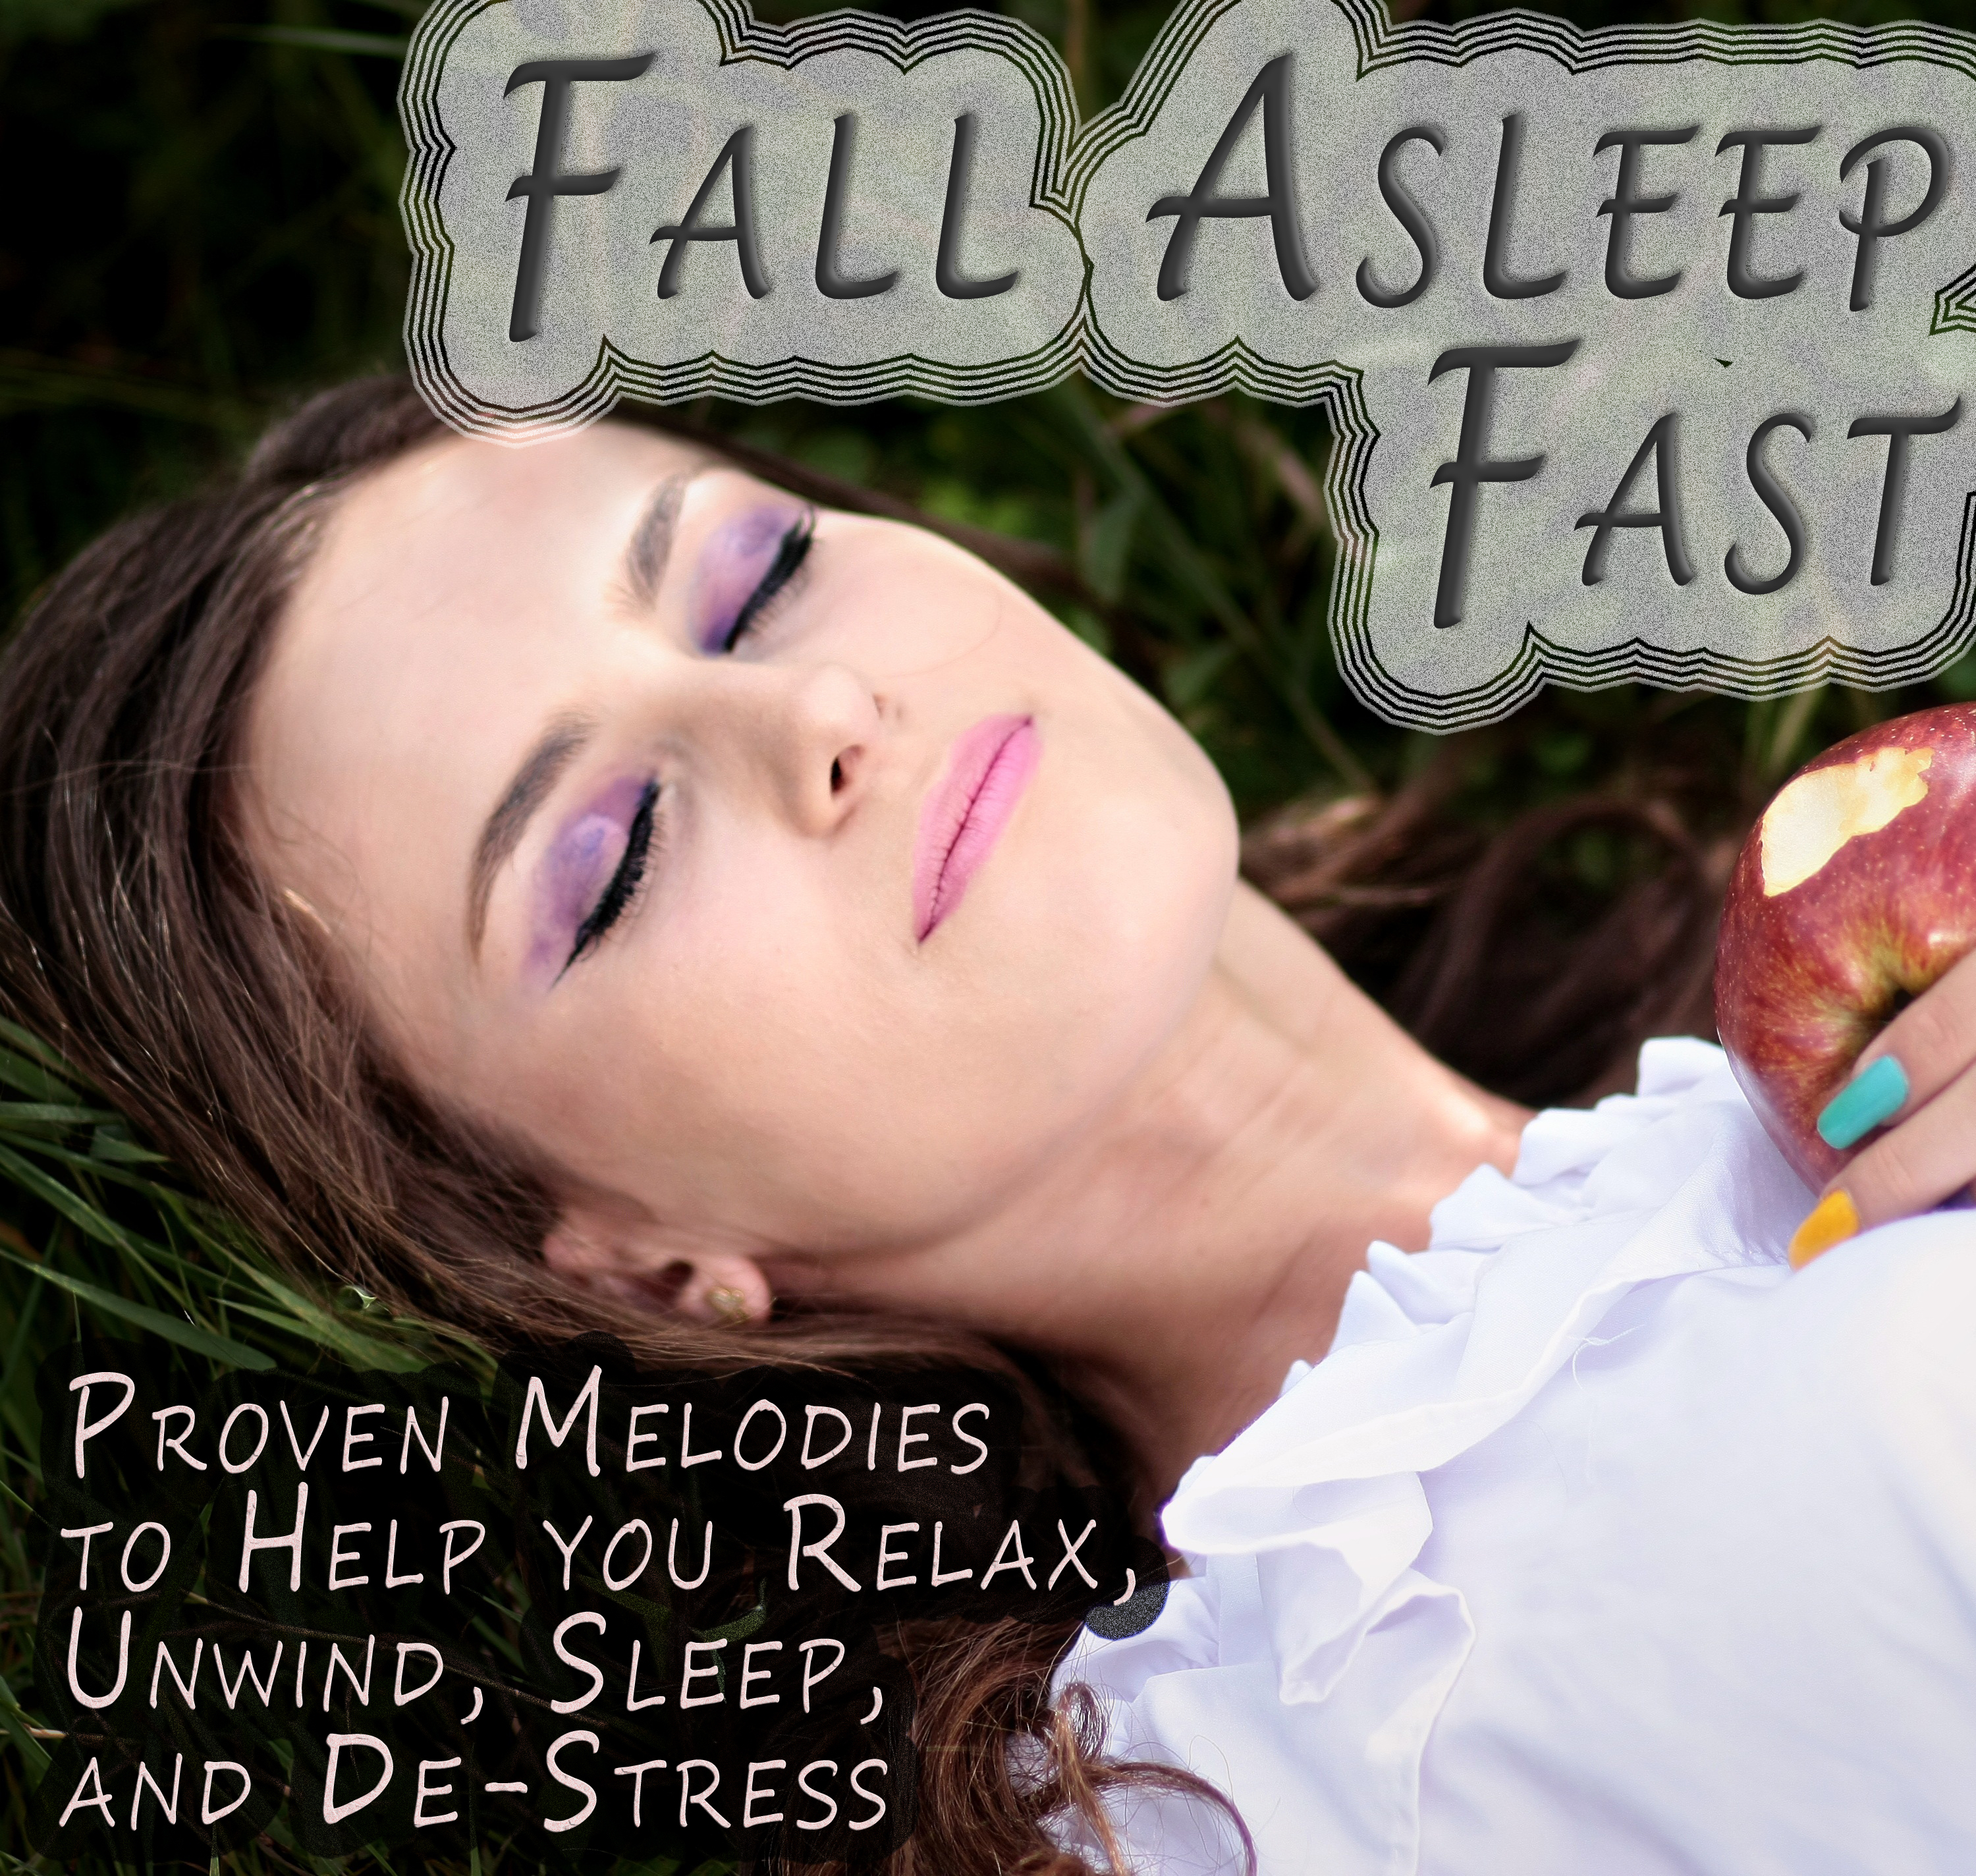 Fall Asleep Fast - Proven Melodies to Help you Relax, Unwind, Sleep, and De-Stress, and Improve Your Mental Health Through Unlocking the Power of Your Dreams